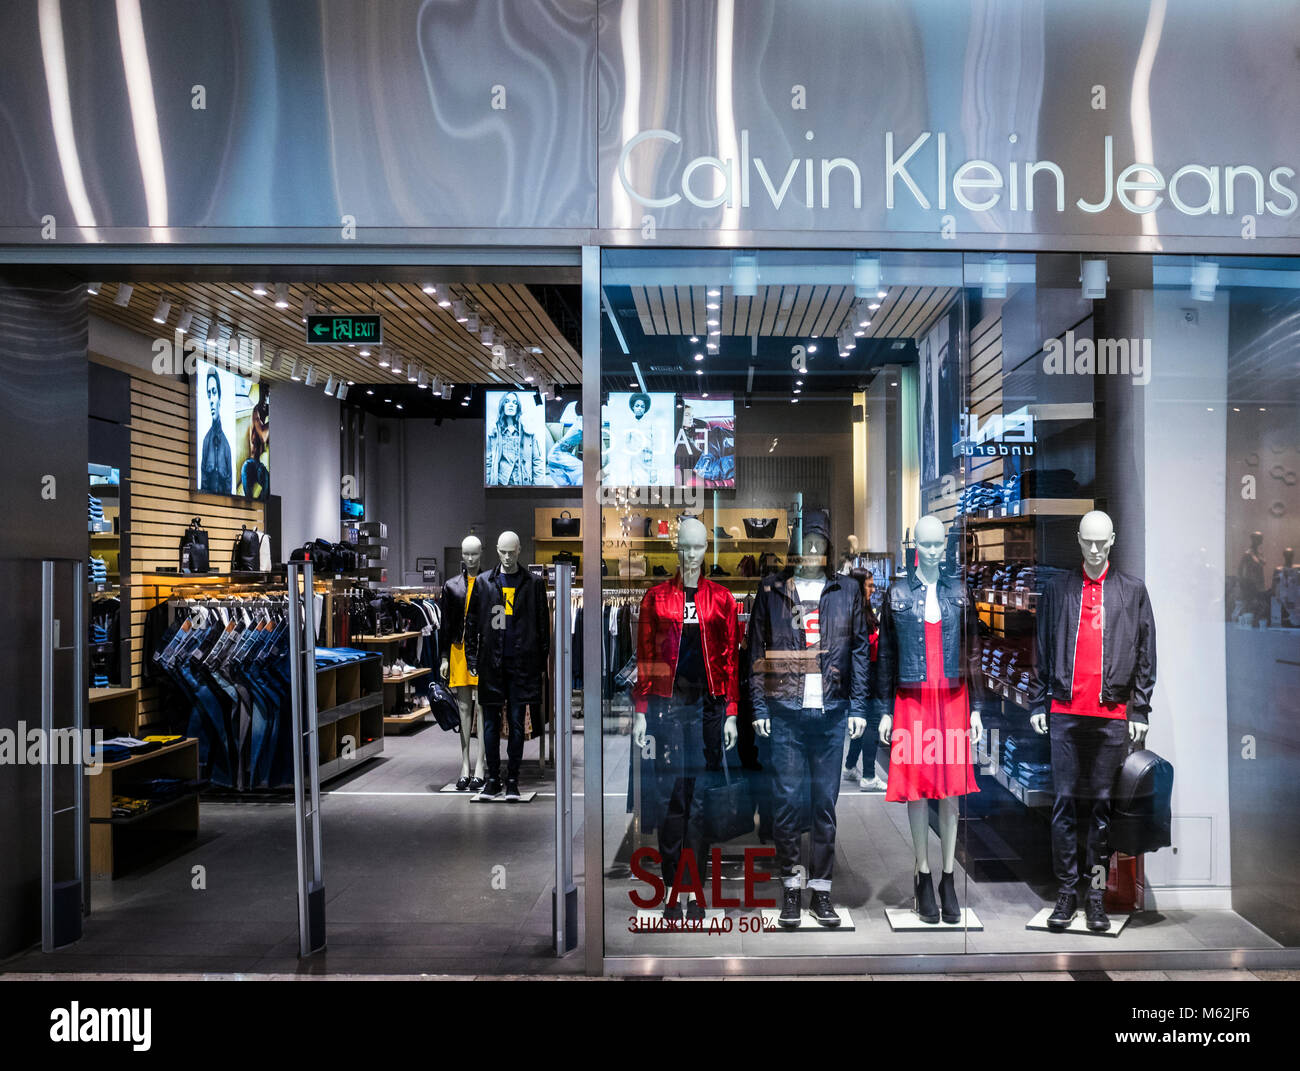 Calvin klein store interior High Resolution Stock Photography and Images -  Alamy